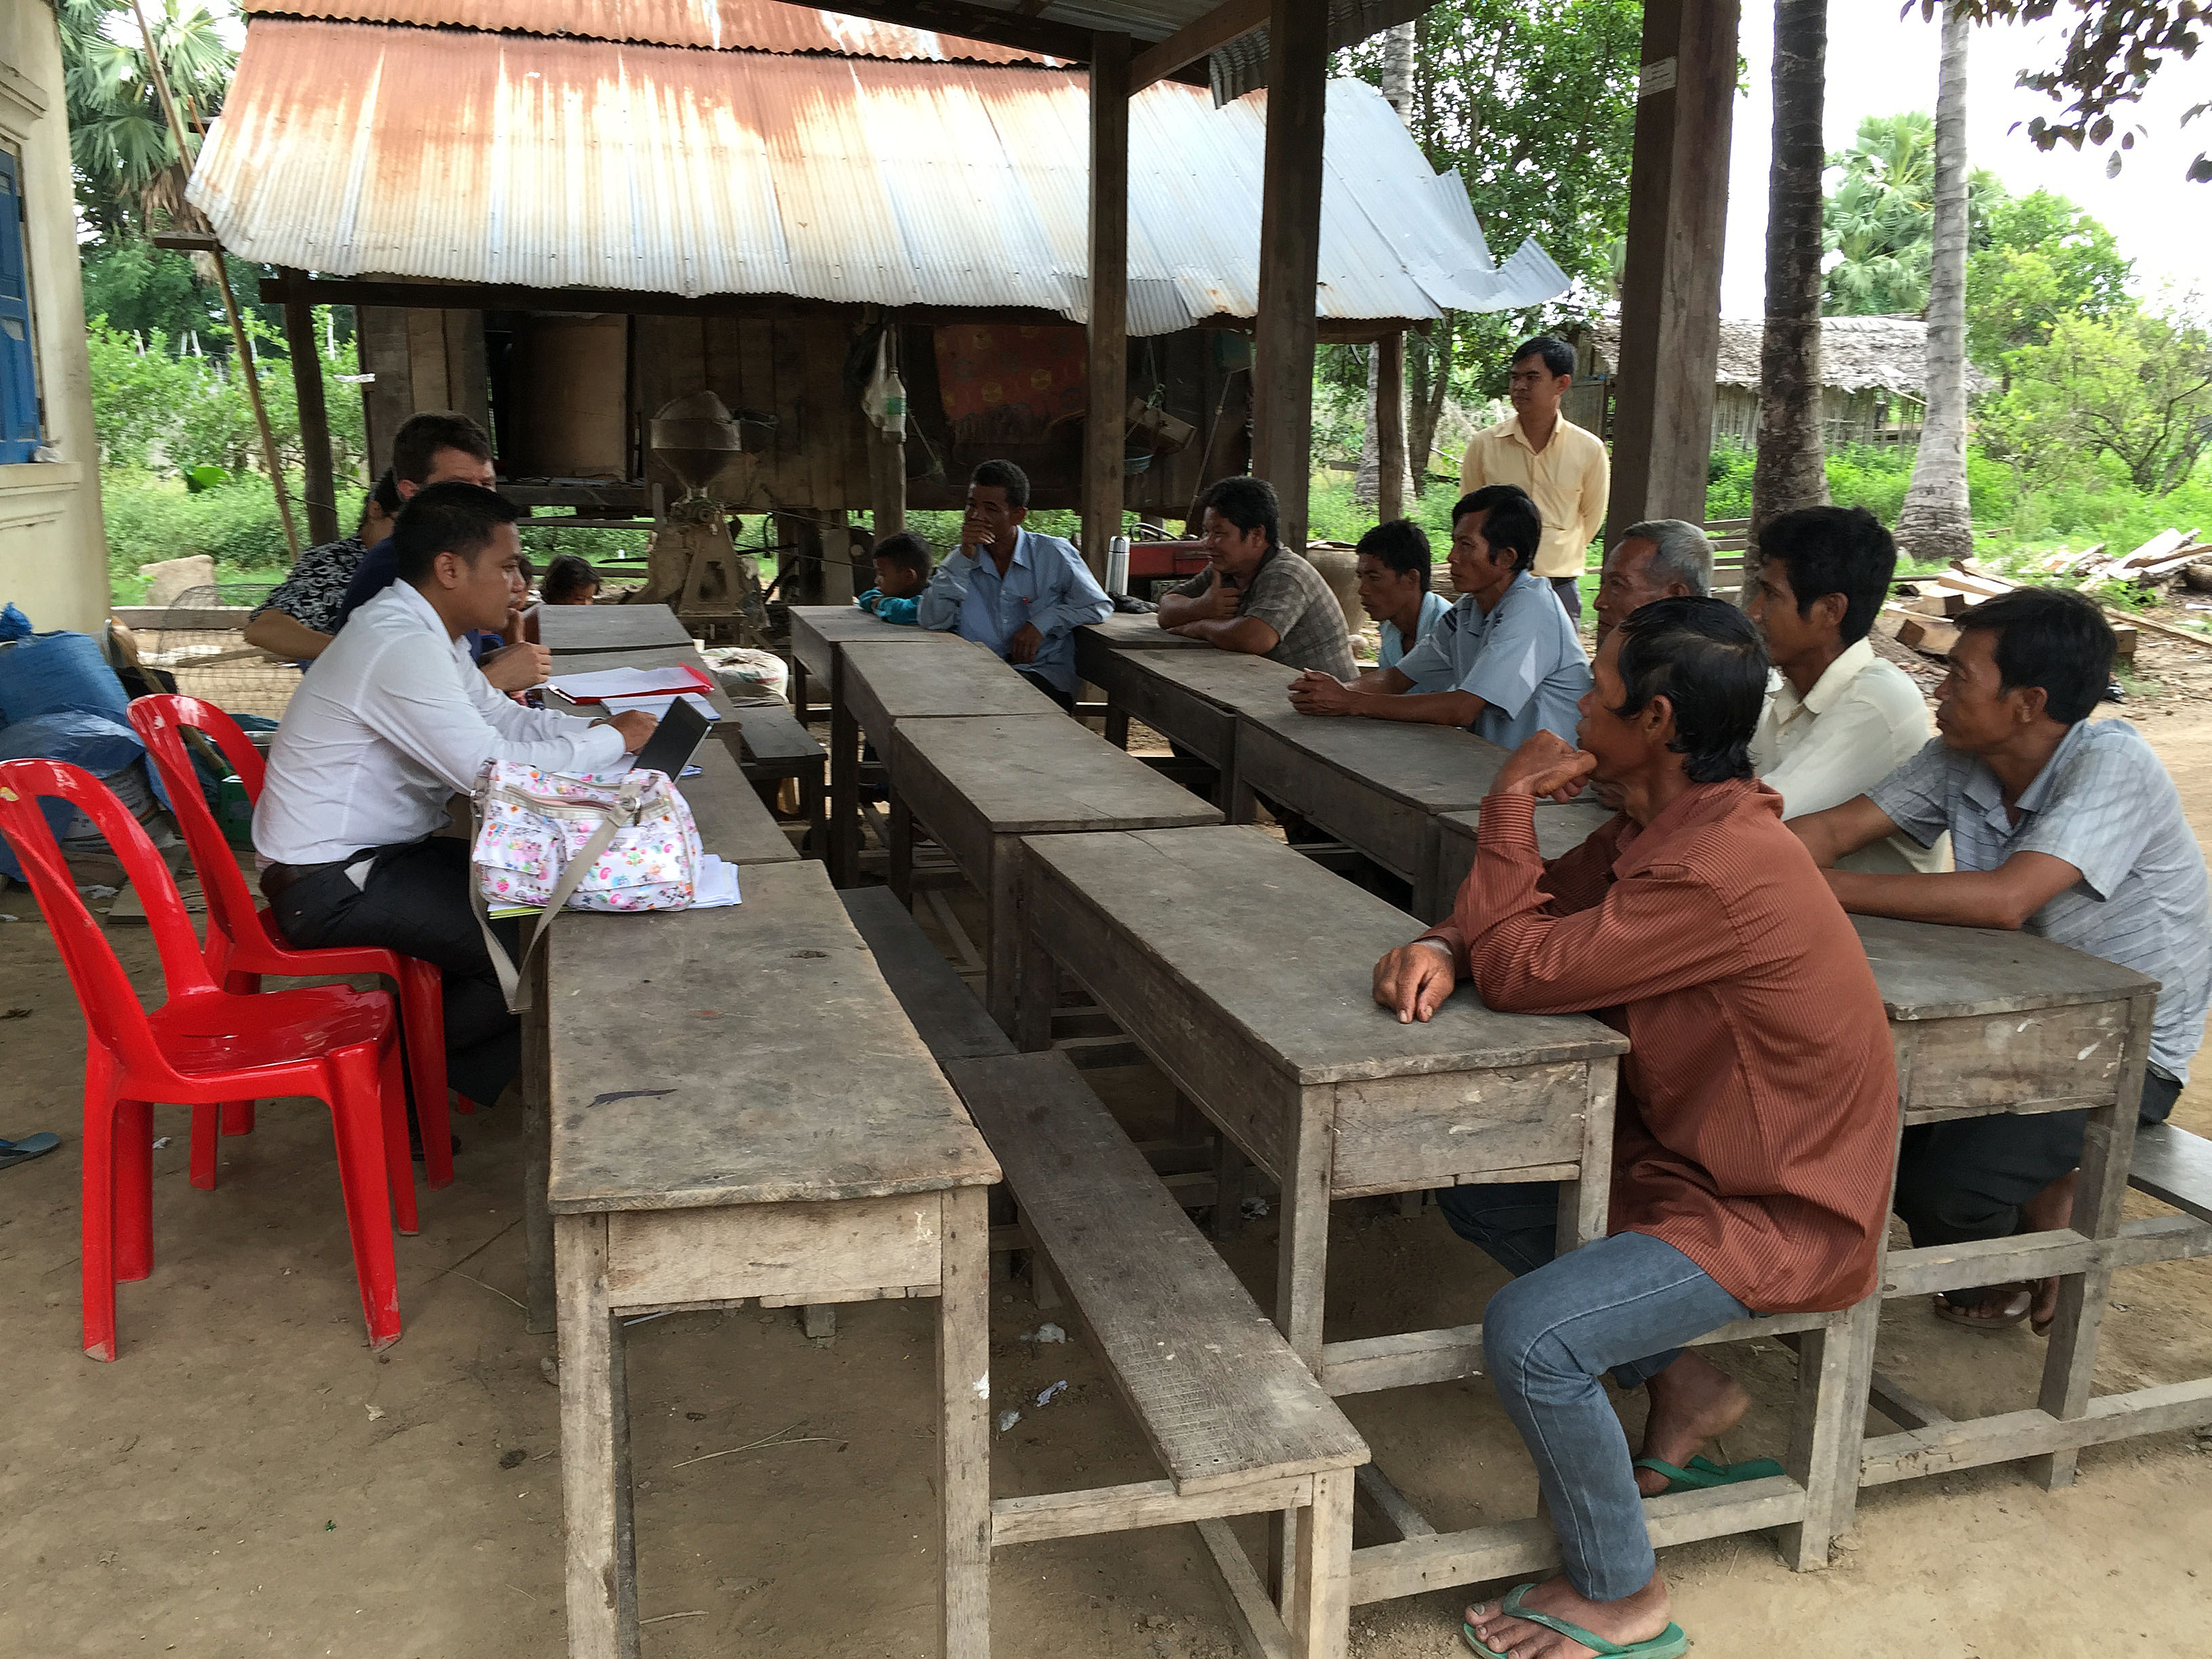 Male farmers meet during a focus group discussion in Cambodia.